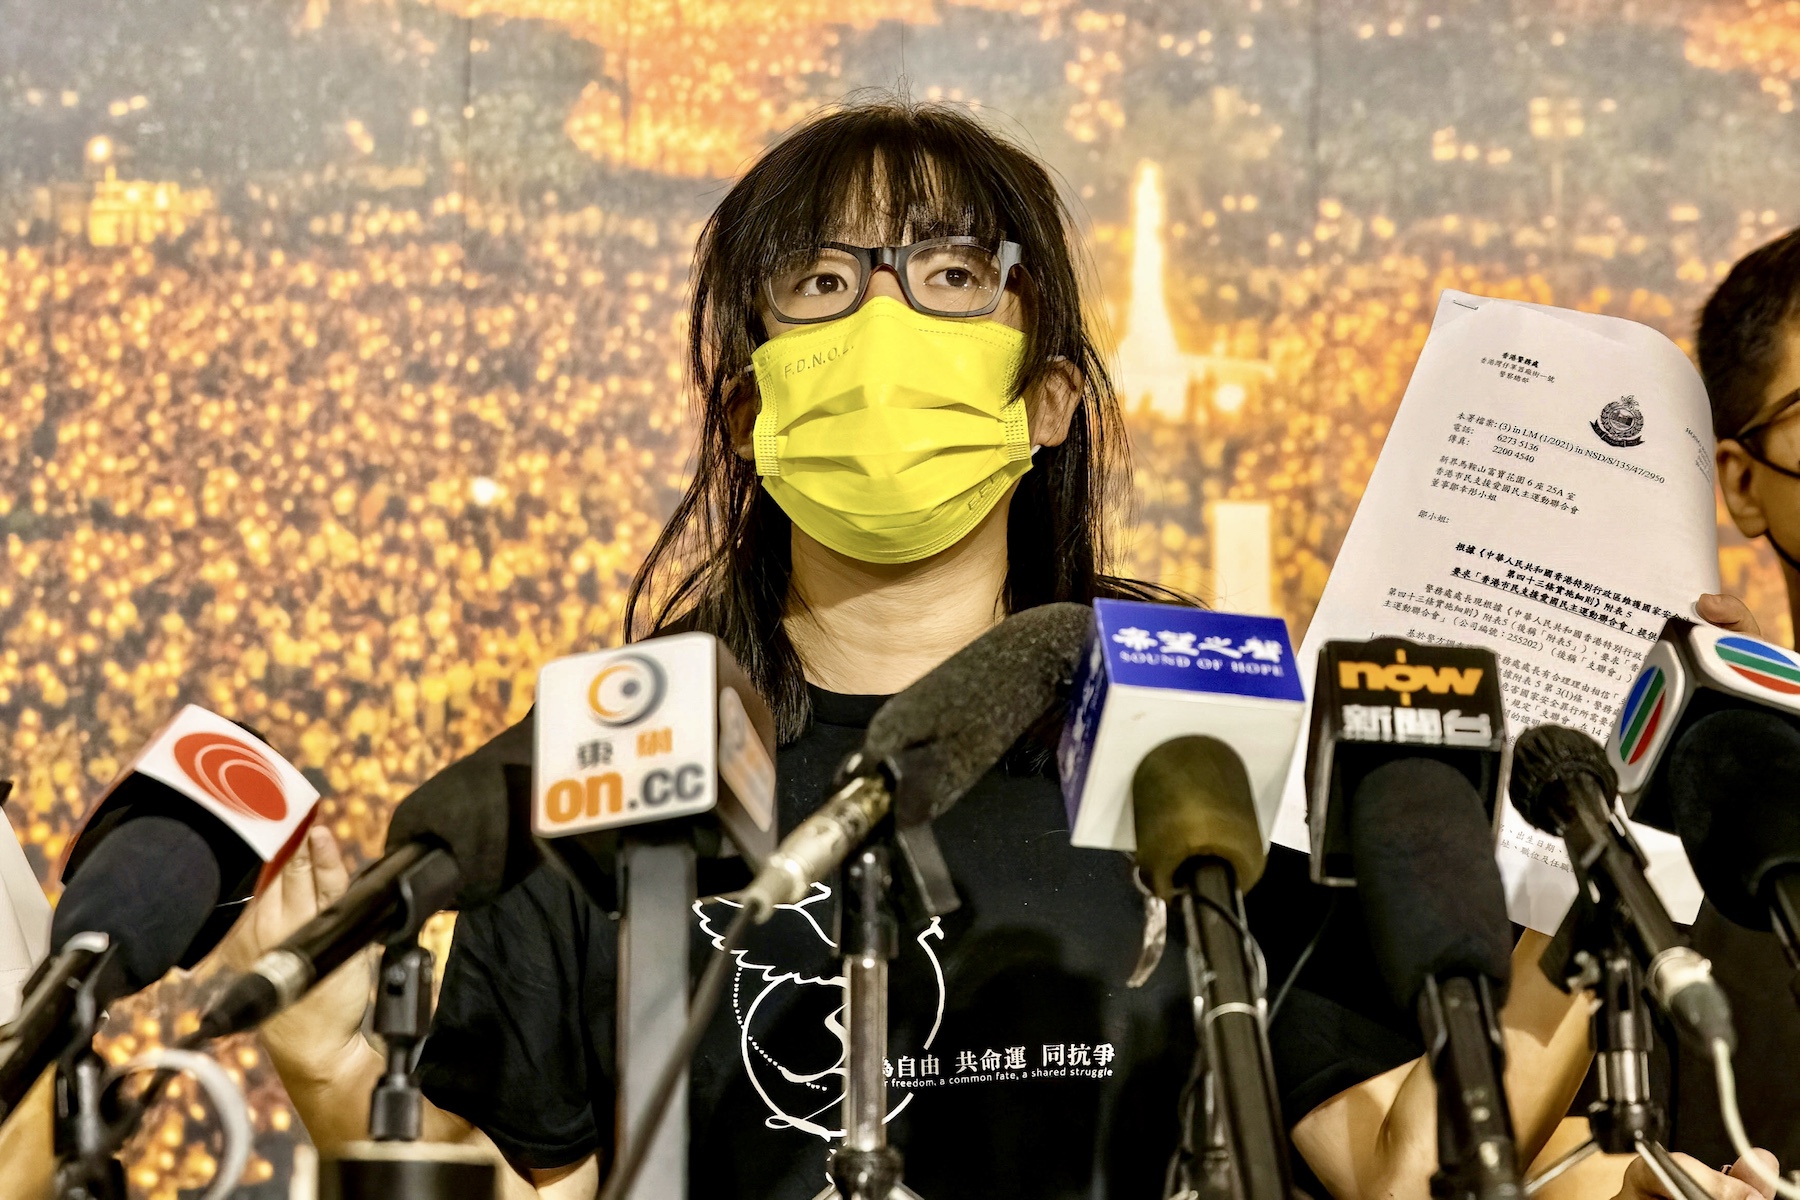 Hong Kong Has Jailed These Three Activists For Four Months For Holding A Tiananmen Square Vigil